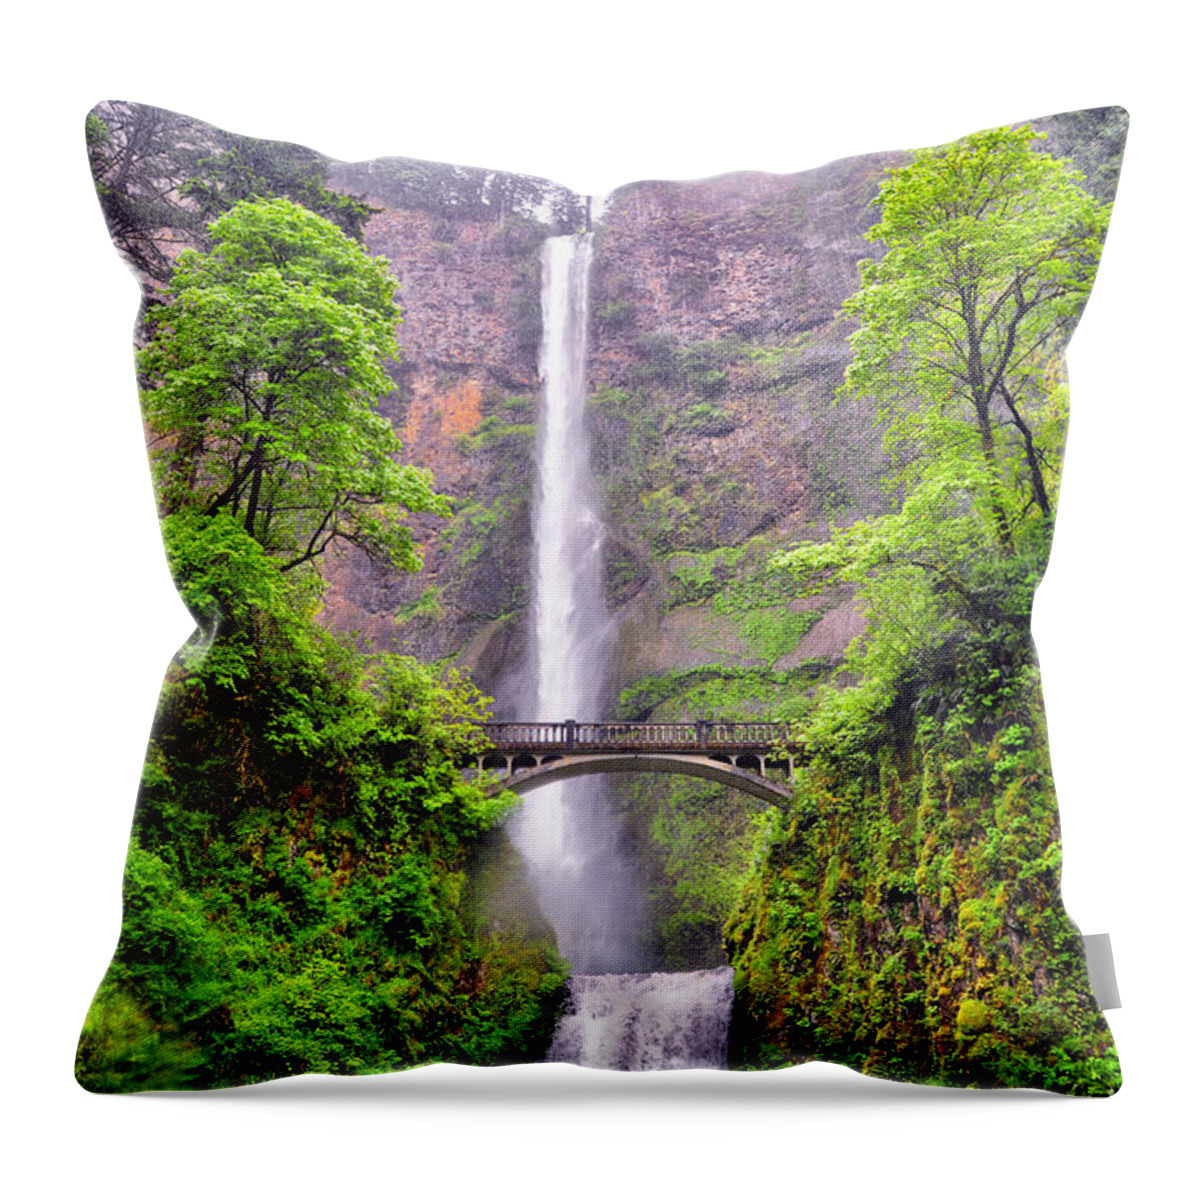 Multnomeh Falls Throw Pillow featuring the photograph Double Falls - Multnomeh Falls - Columbia River Gorge - Oregon by Bruce Friedman